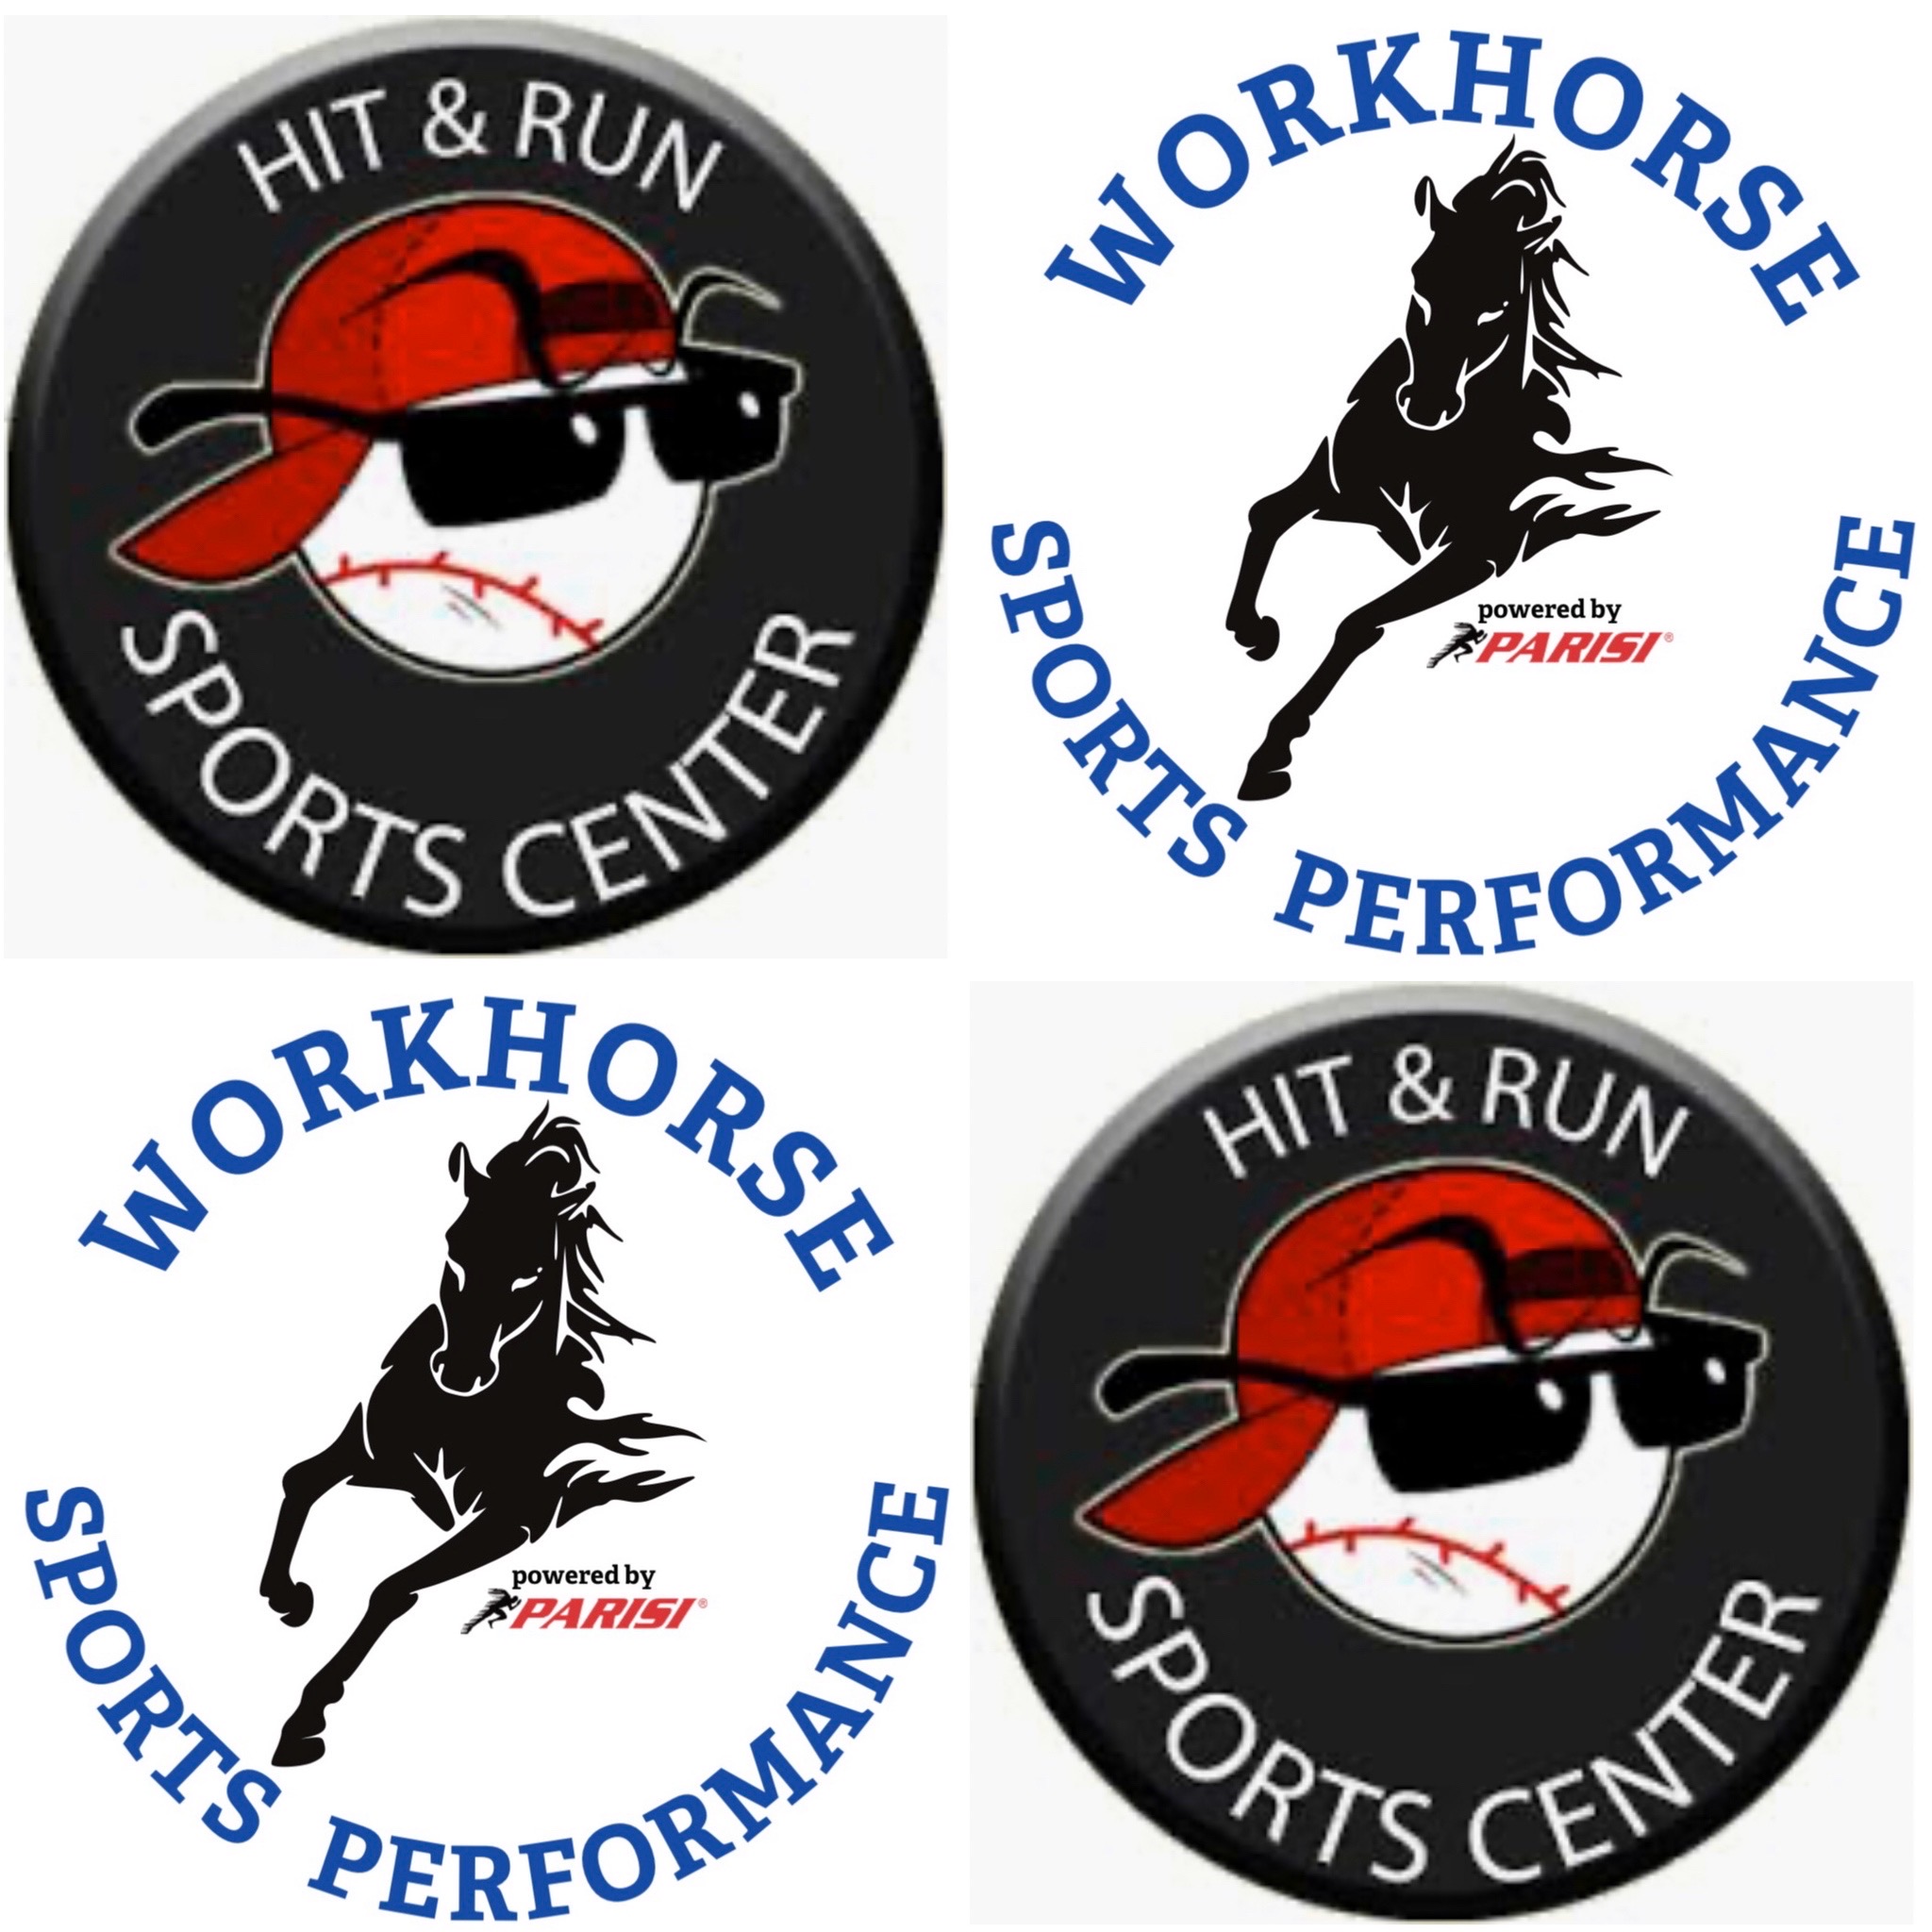 Workhorse Partners With Hit & Run Sports Center